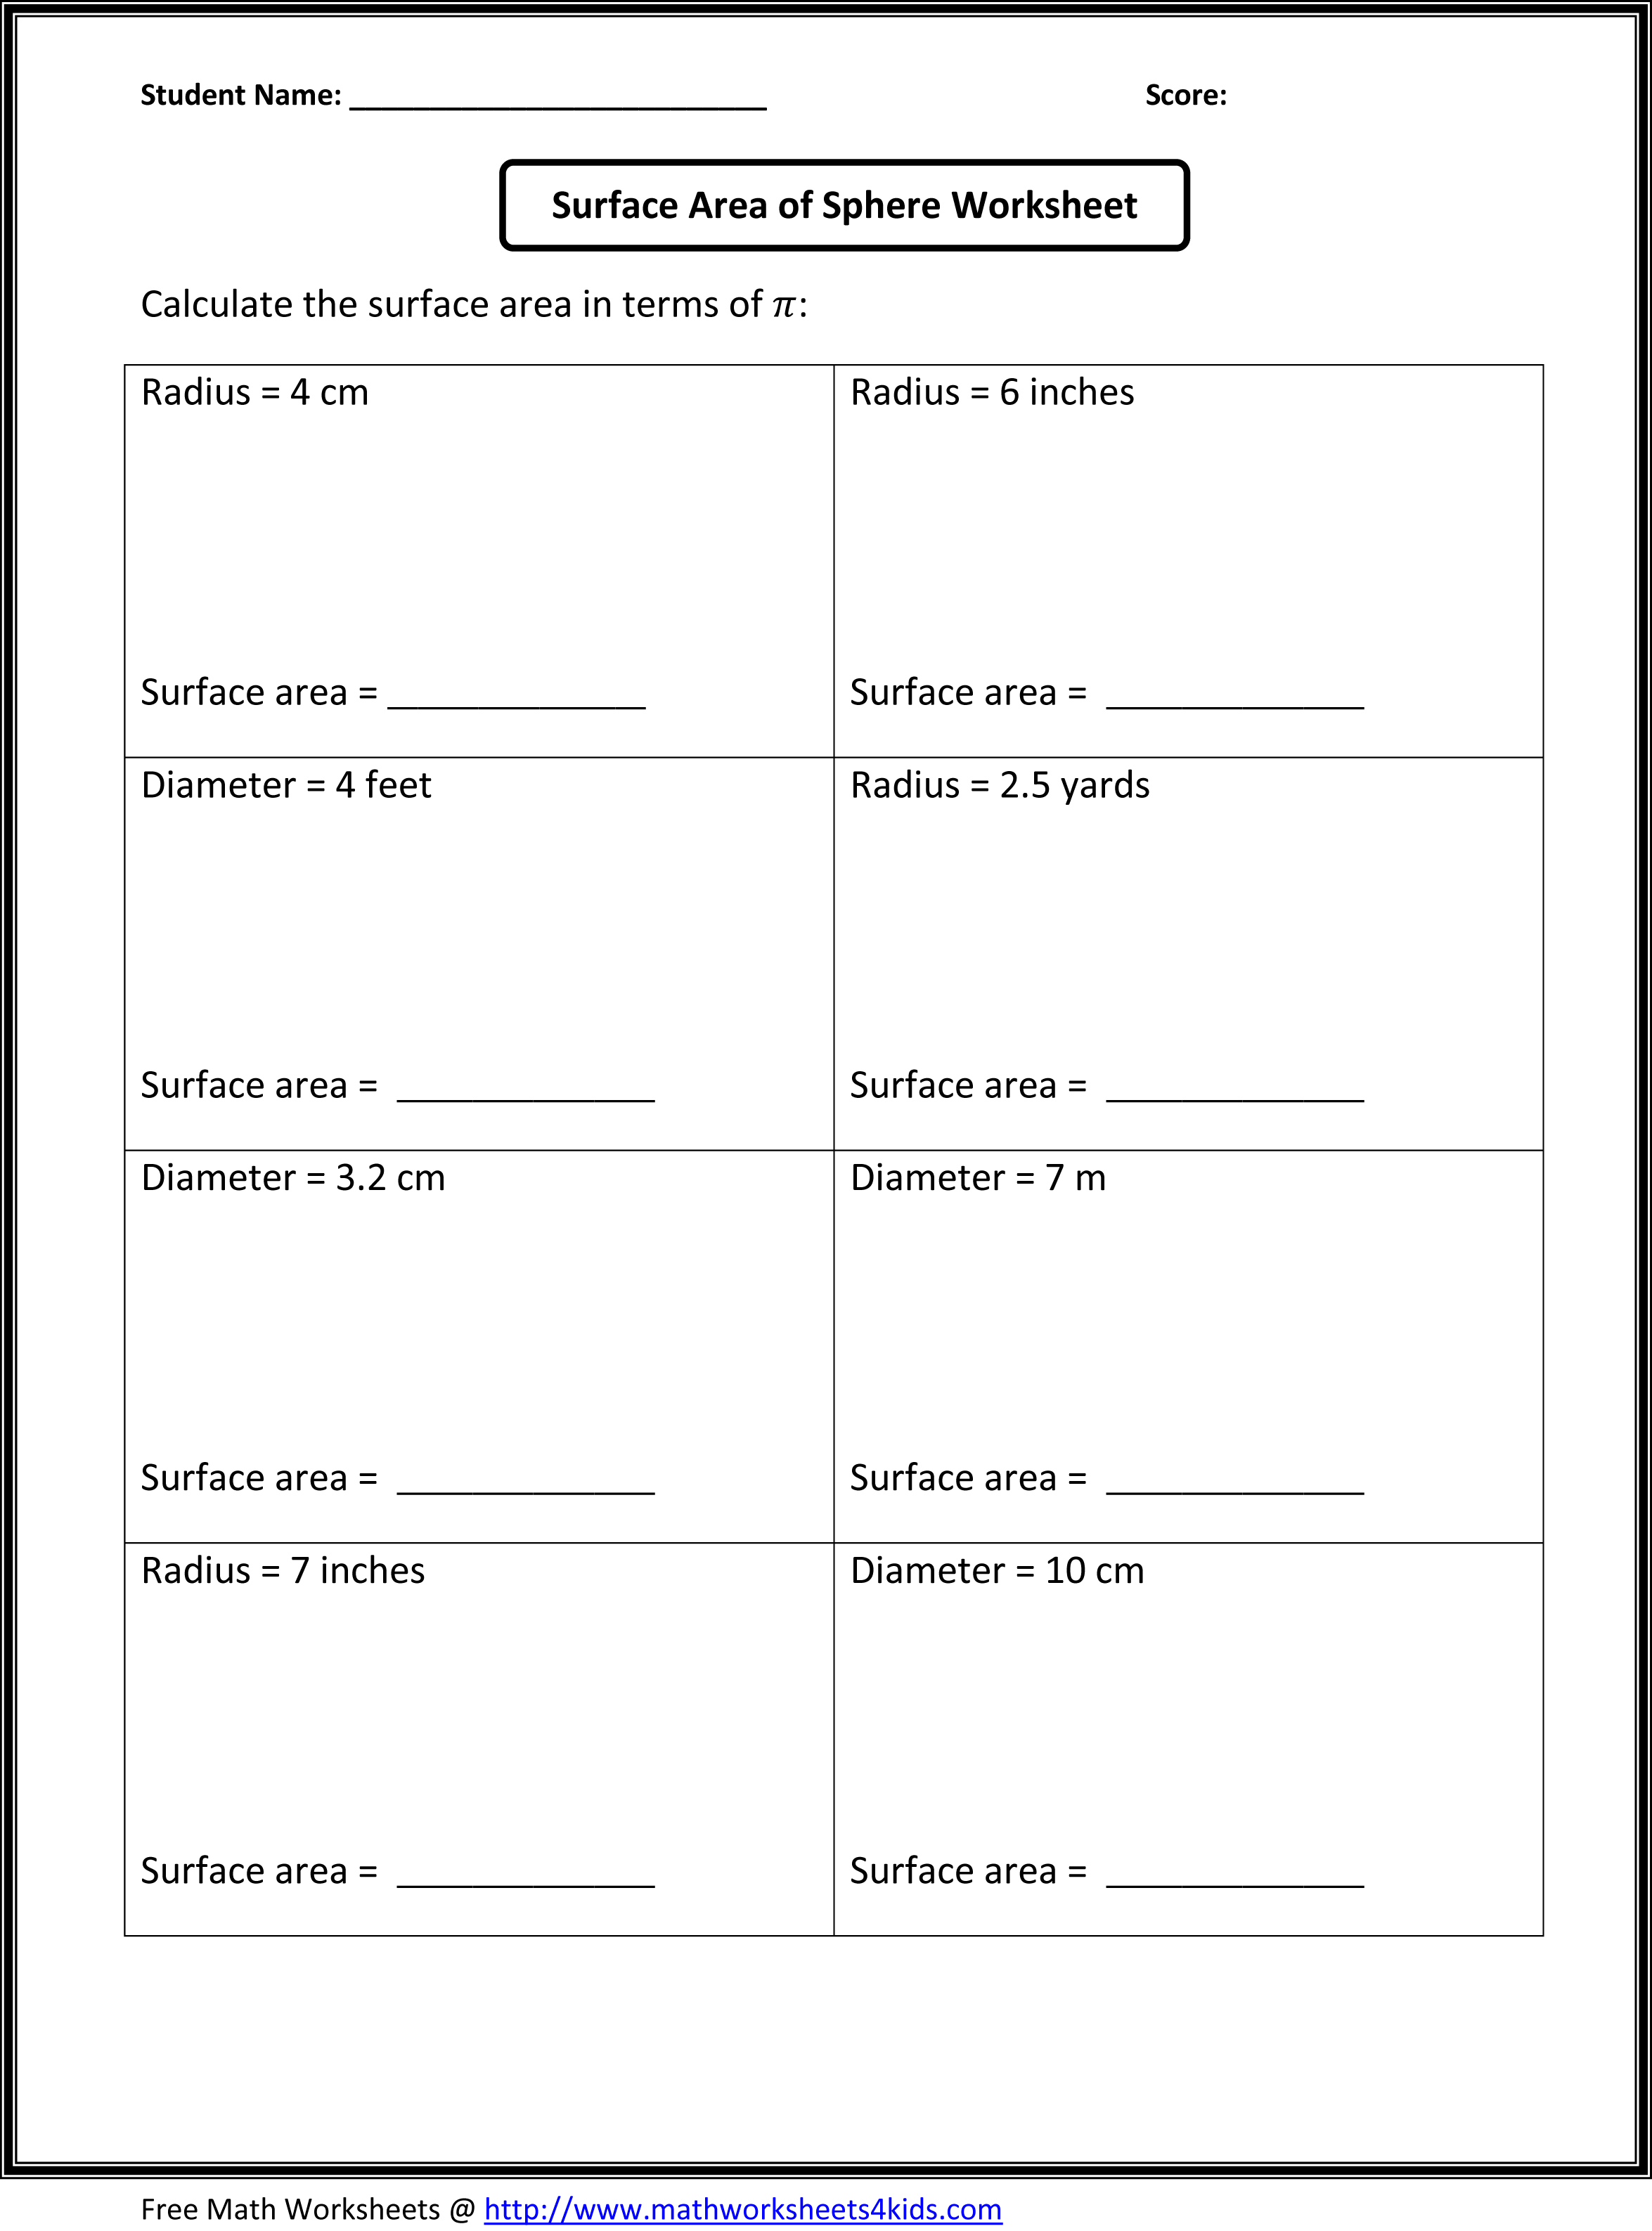 13 Best Images of Surface Area Word Problems Worksheet ...